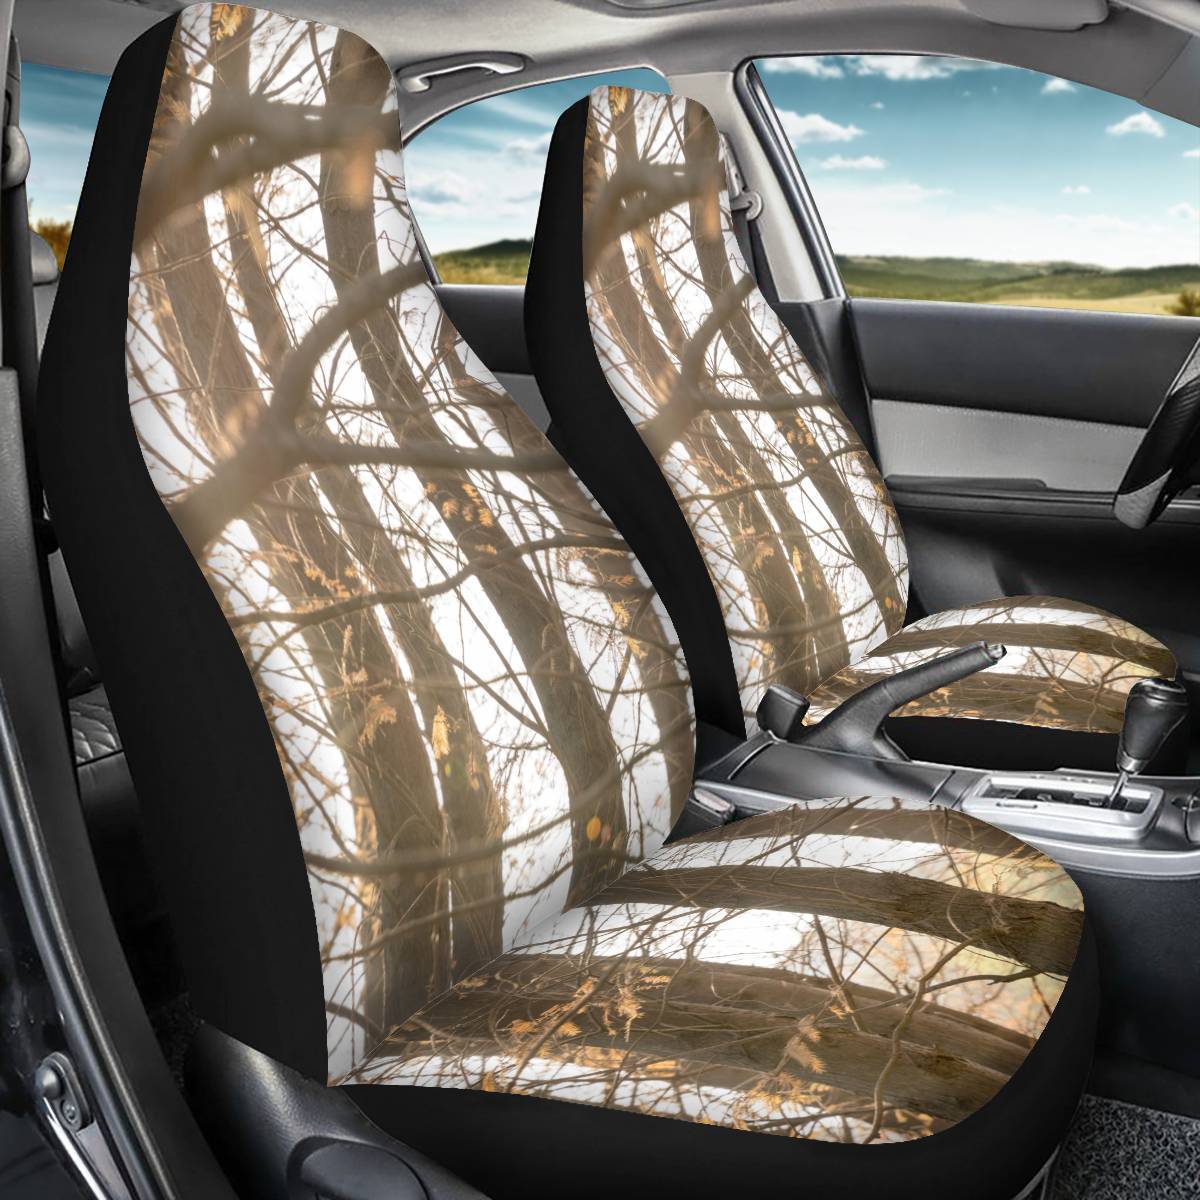 2 Pieces Wearproof Dirt-proof Easy to Clean Front Single Car Seat Covers Plant Landscape Summer Cooling Four Seasons Car Seat Covers for Front Two Seats Comes with 2 Pieces - Honeycomb Cloth